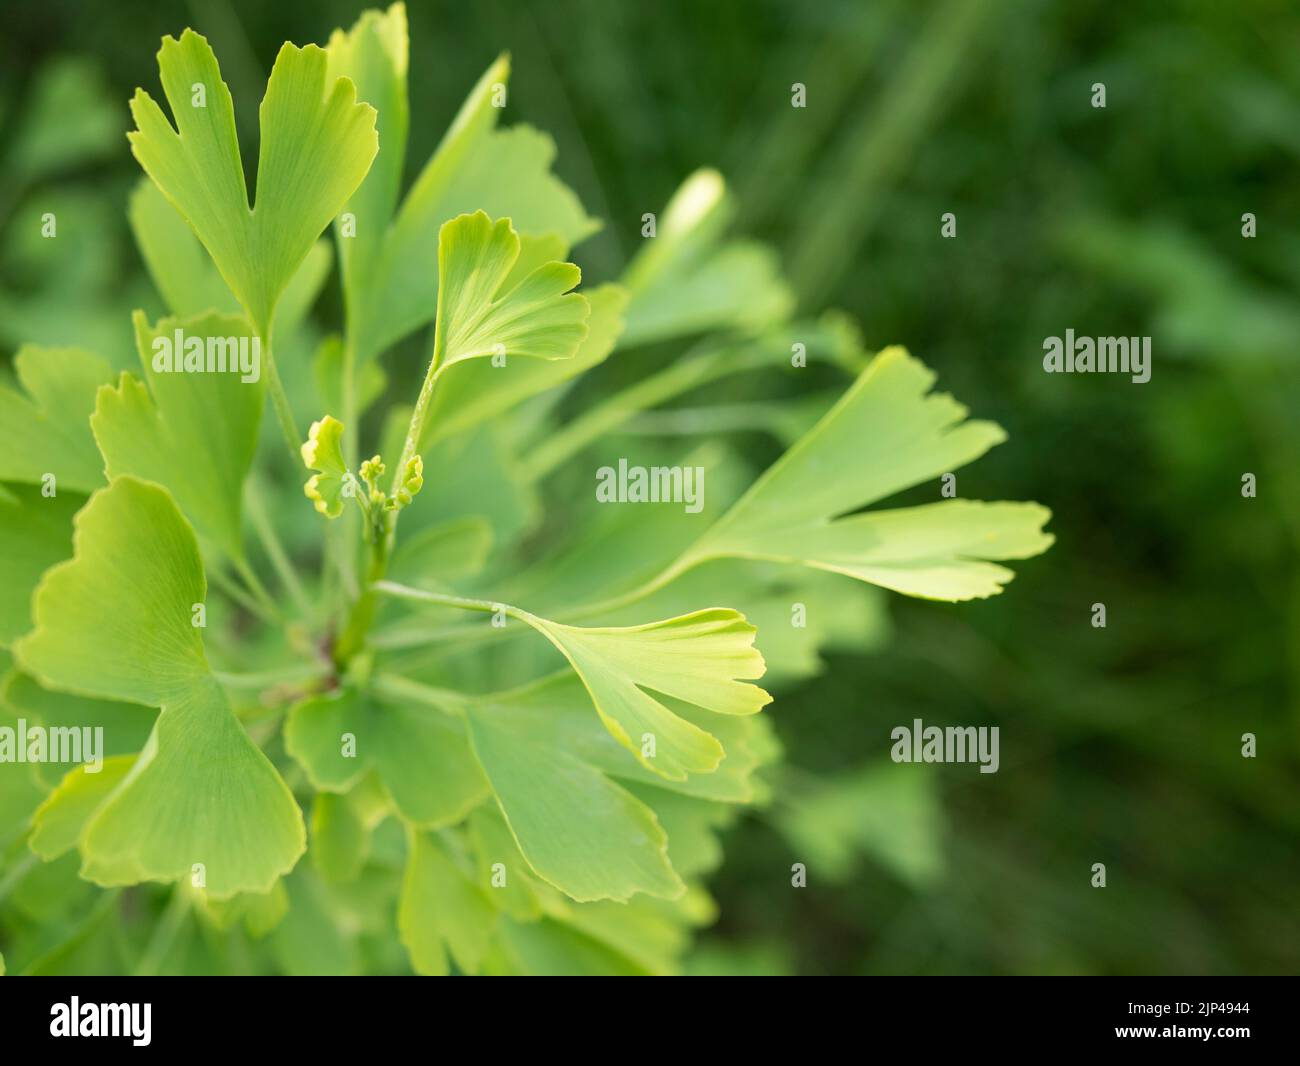 Ginkgo biloba leaves, selective focus. Young shoots of Ginkgo tree. Dietary supplement, alternative, herbal medicine Stock Photo